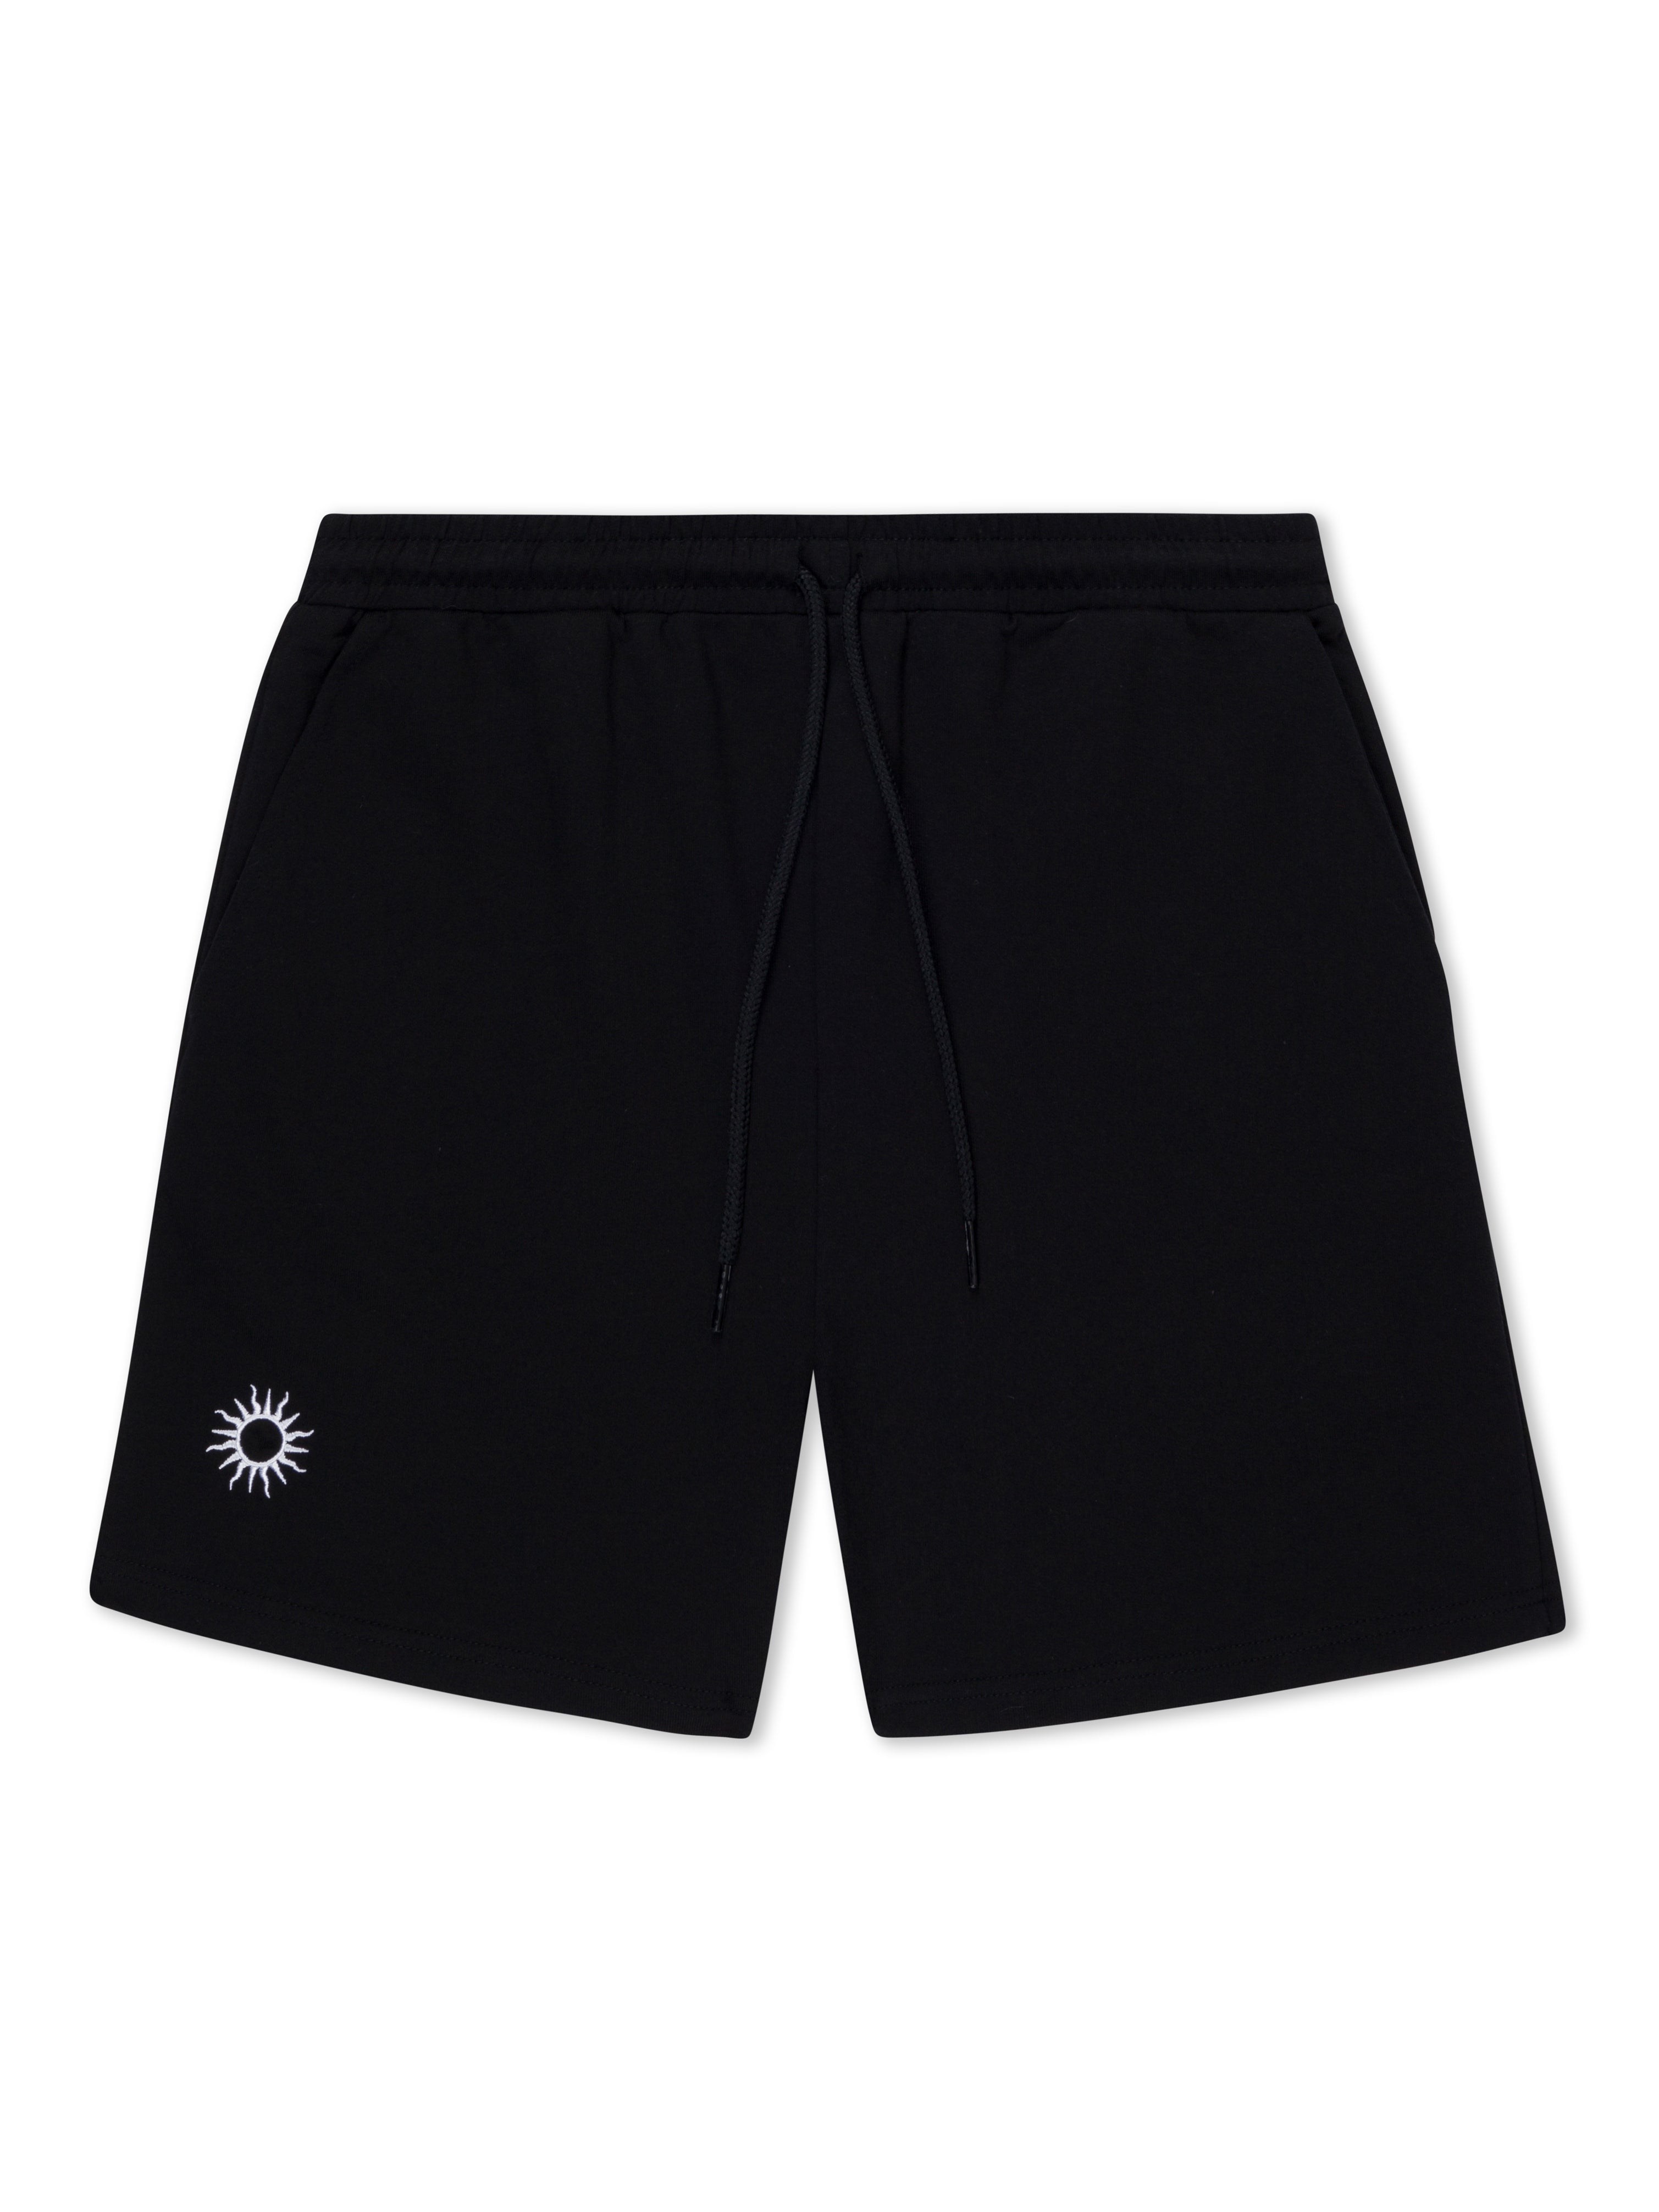 mens black cotton training pants with white sun embroidered on the right leg